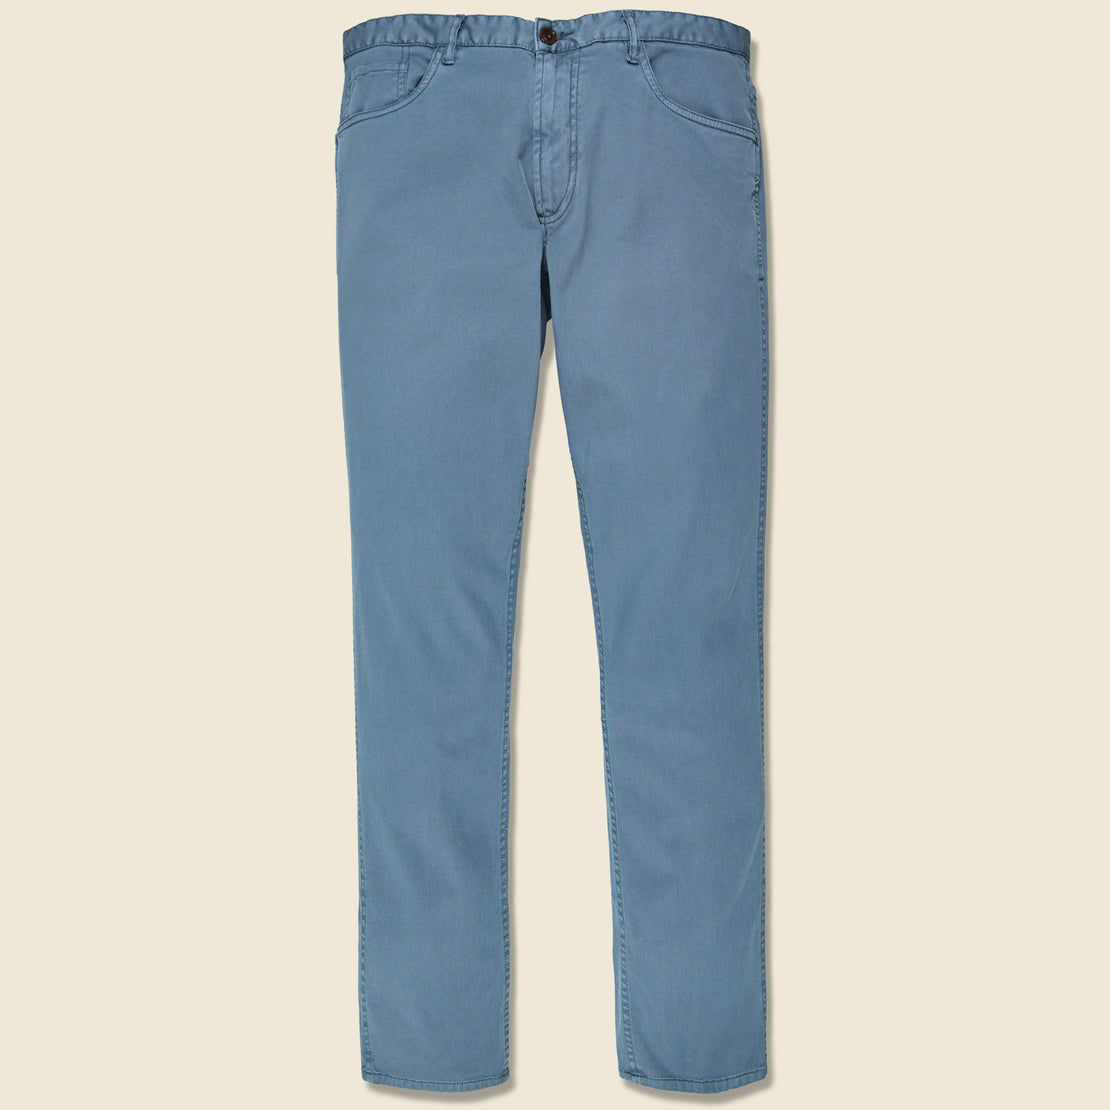 Faherty Comfort Twill Jean - Washed Blue